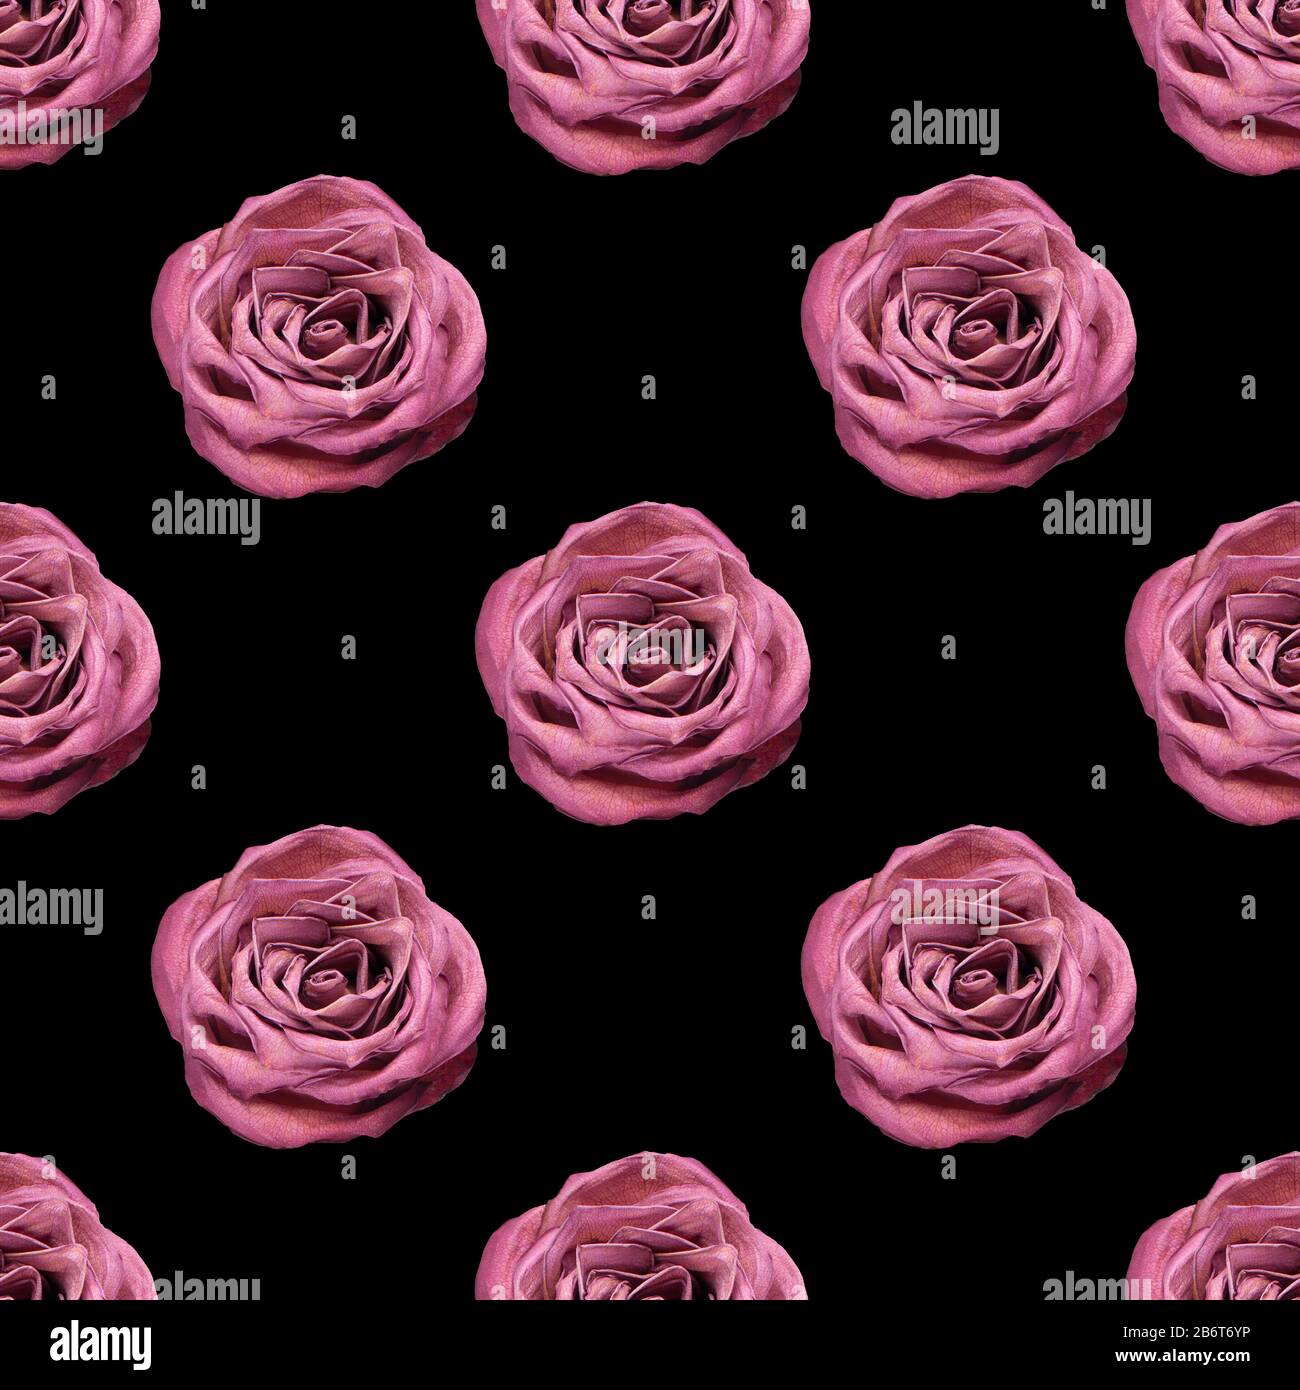 Seamless pattern of pink rose flower on black background isolated close up,  burgundy roses repeating ornament, red flowers trendy vintage print design  Stock Photo - Alamy